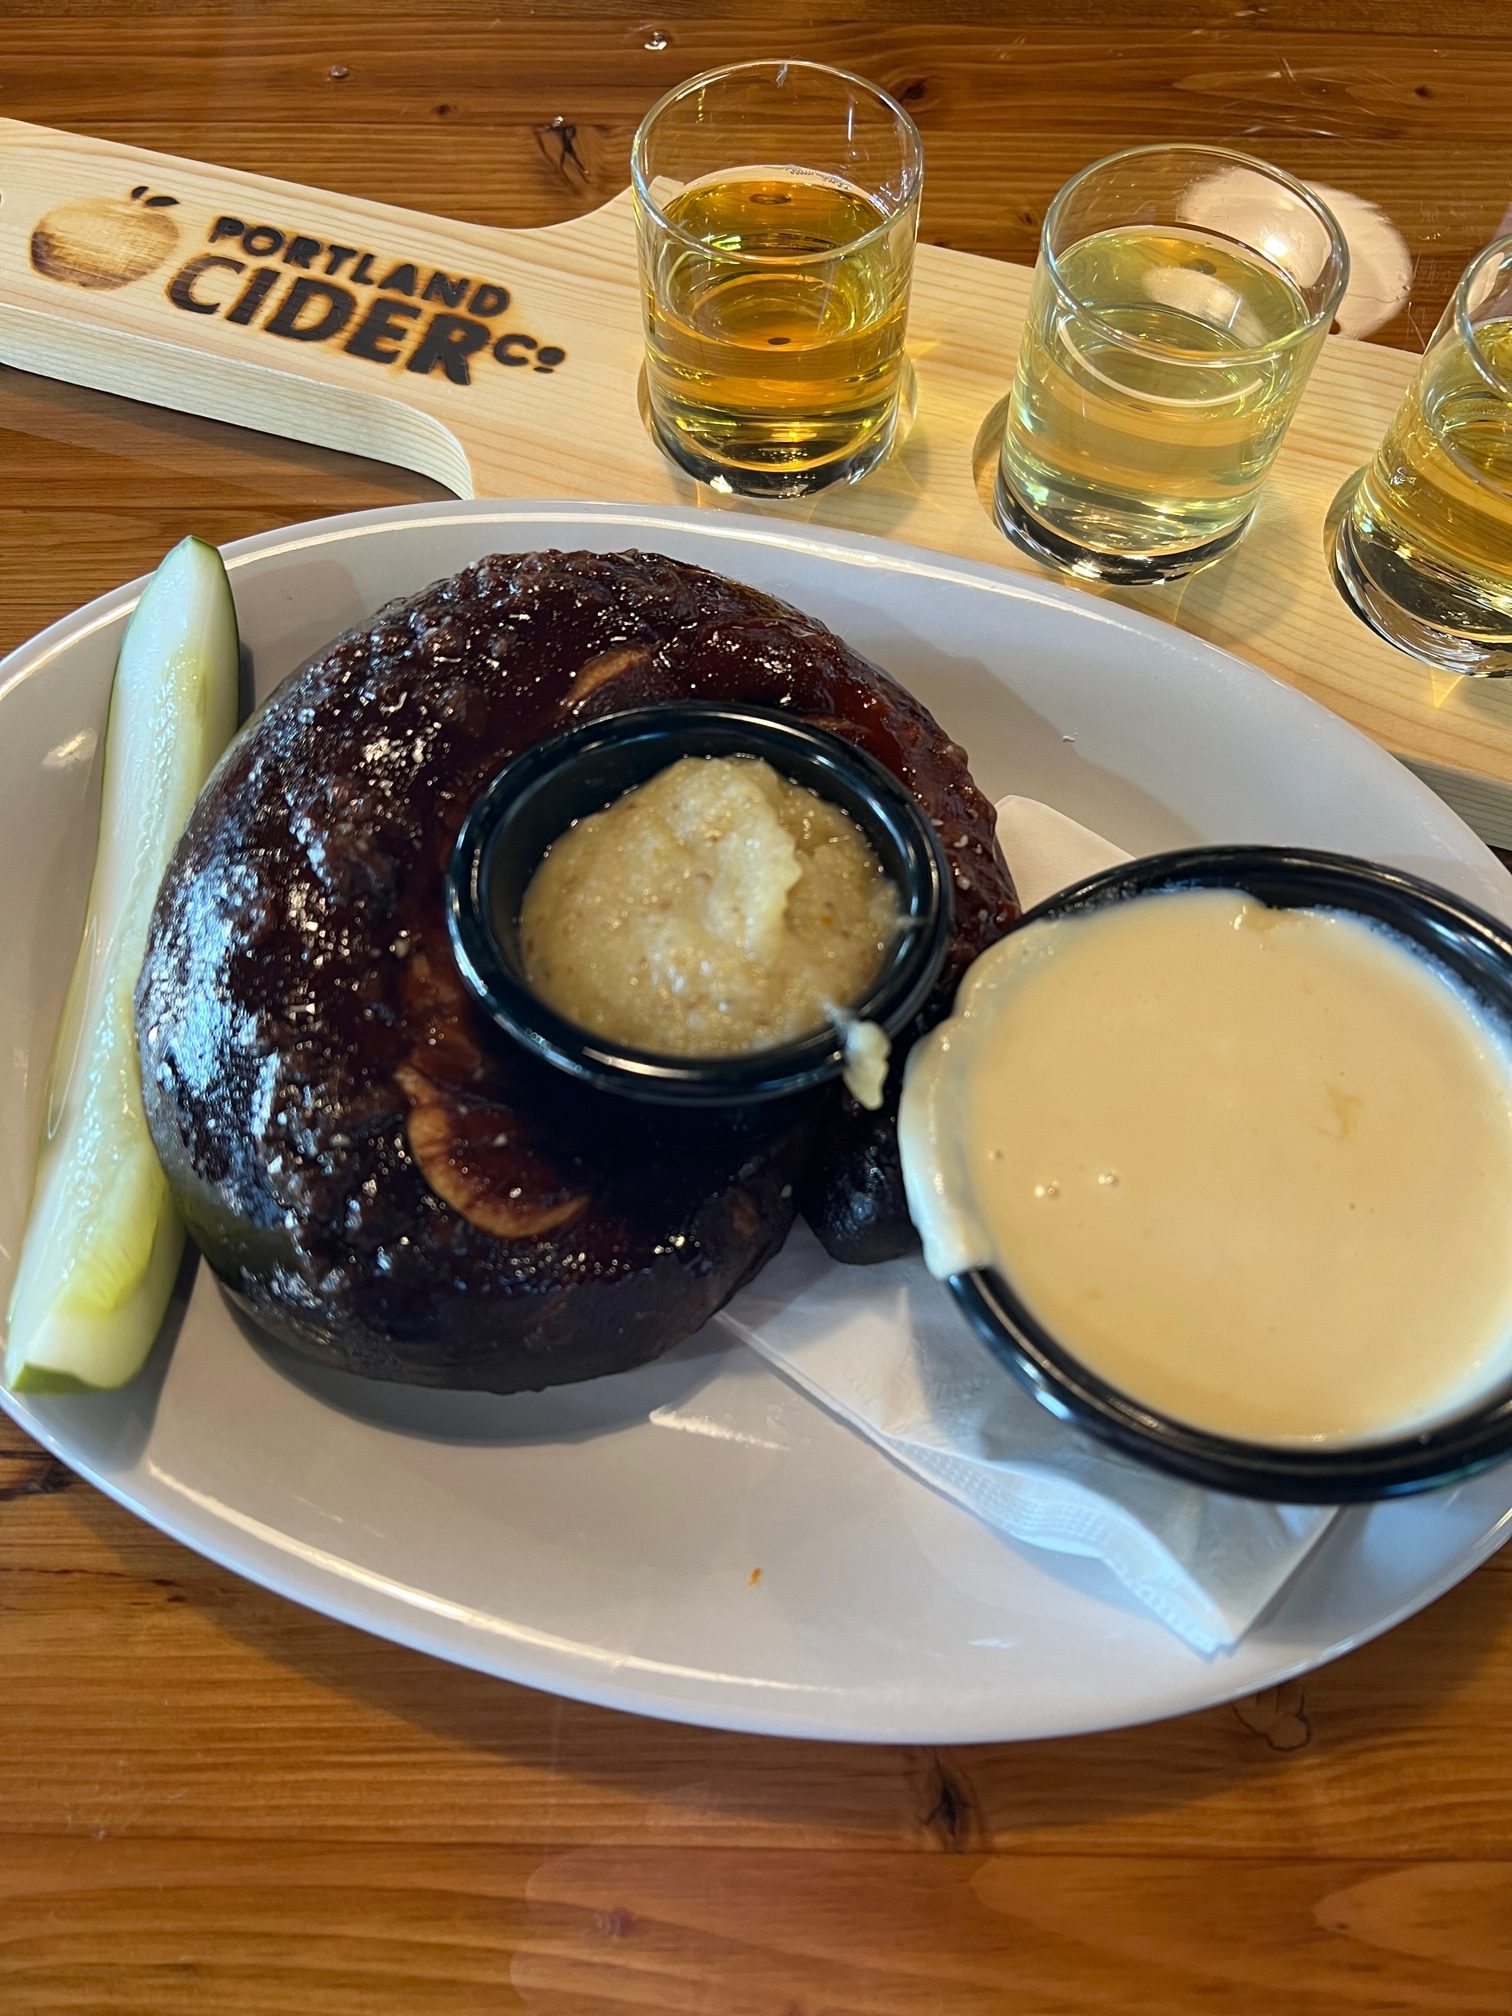 The Cider Fondue makes for a great starter at the Portland Cider Co. Clackamas Pub & Restaurant.